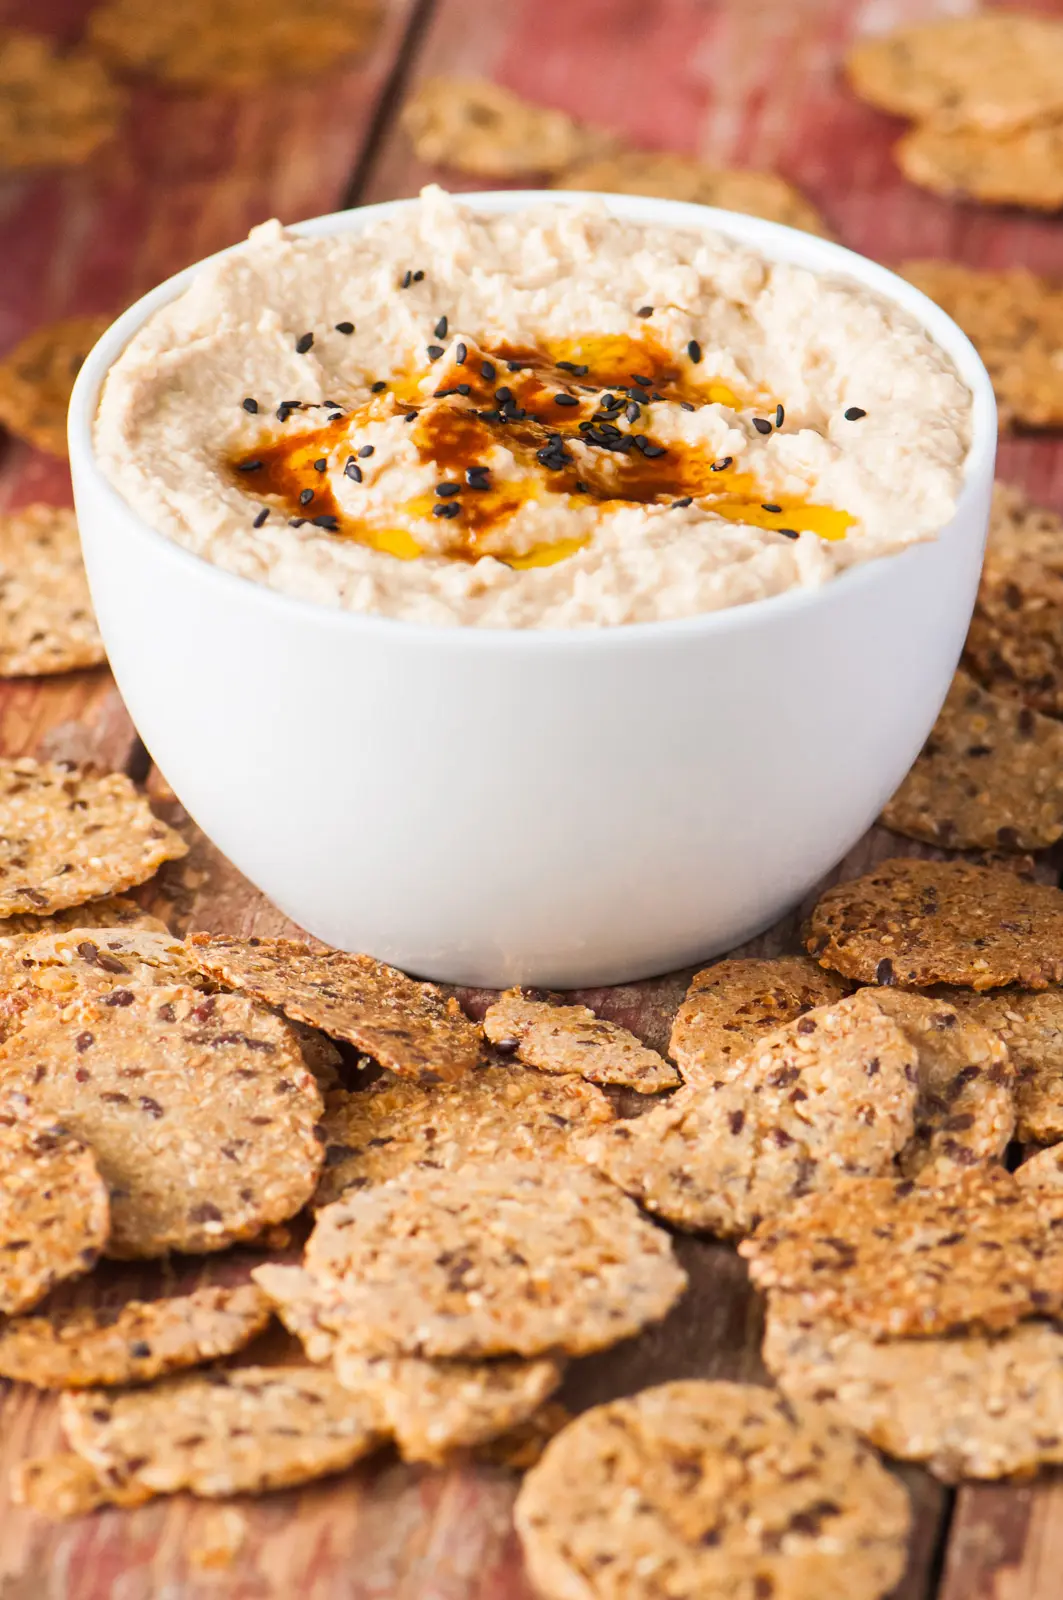 A bowl of smoky chipotle hummus is surrounded by multi-grain crackers.